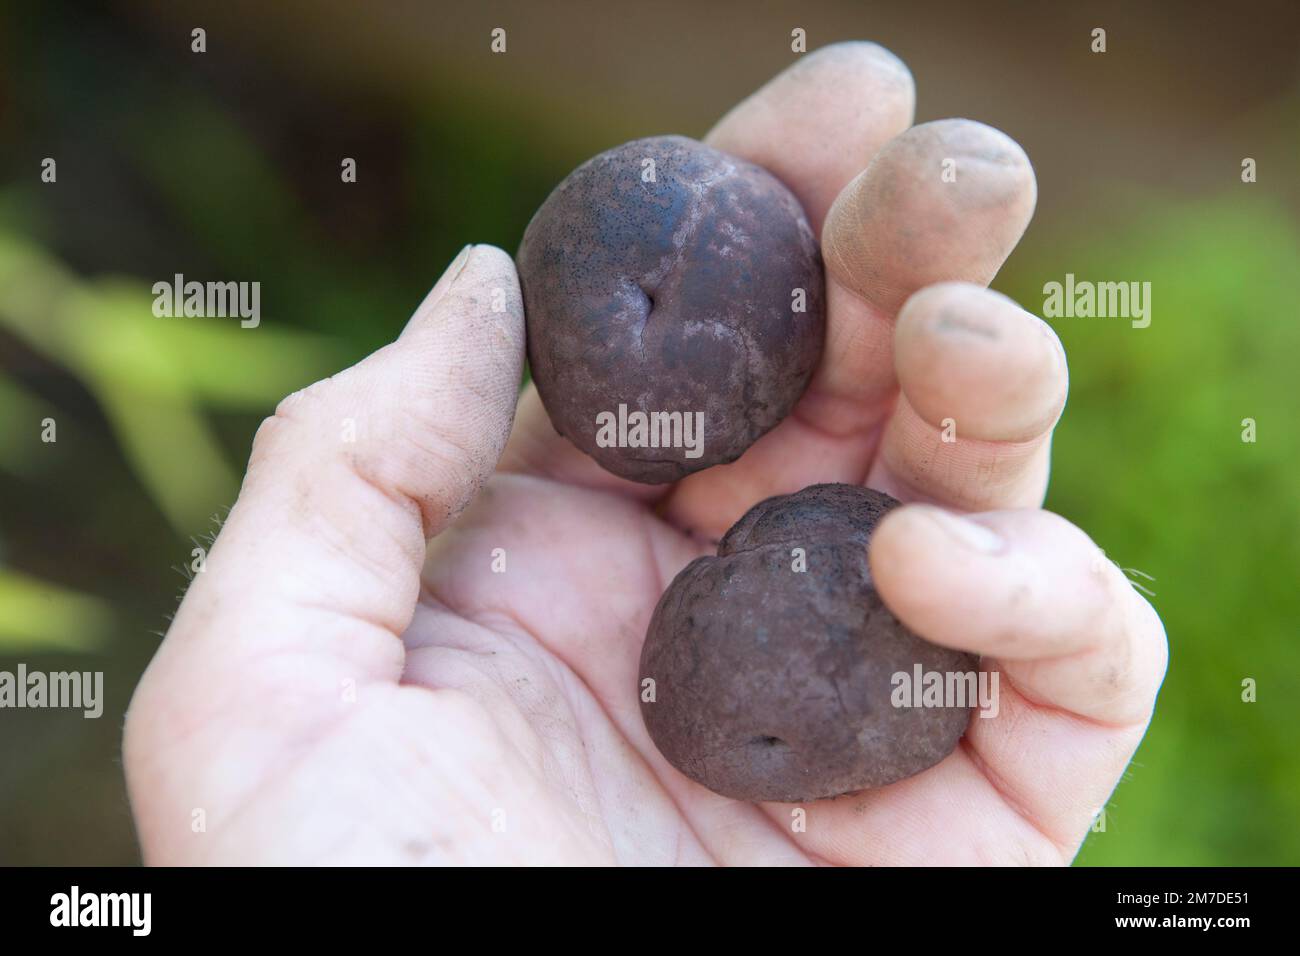 King Alfred's cakes, coal fungus or cramp balls, all names given to these black balls found on dead ash trees and are a reminder of the cakes that King Alfred is said to have burnt. Stock Photo